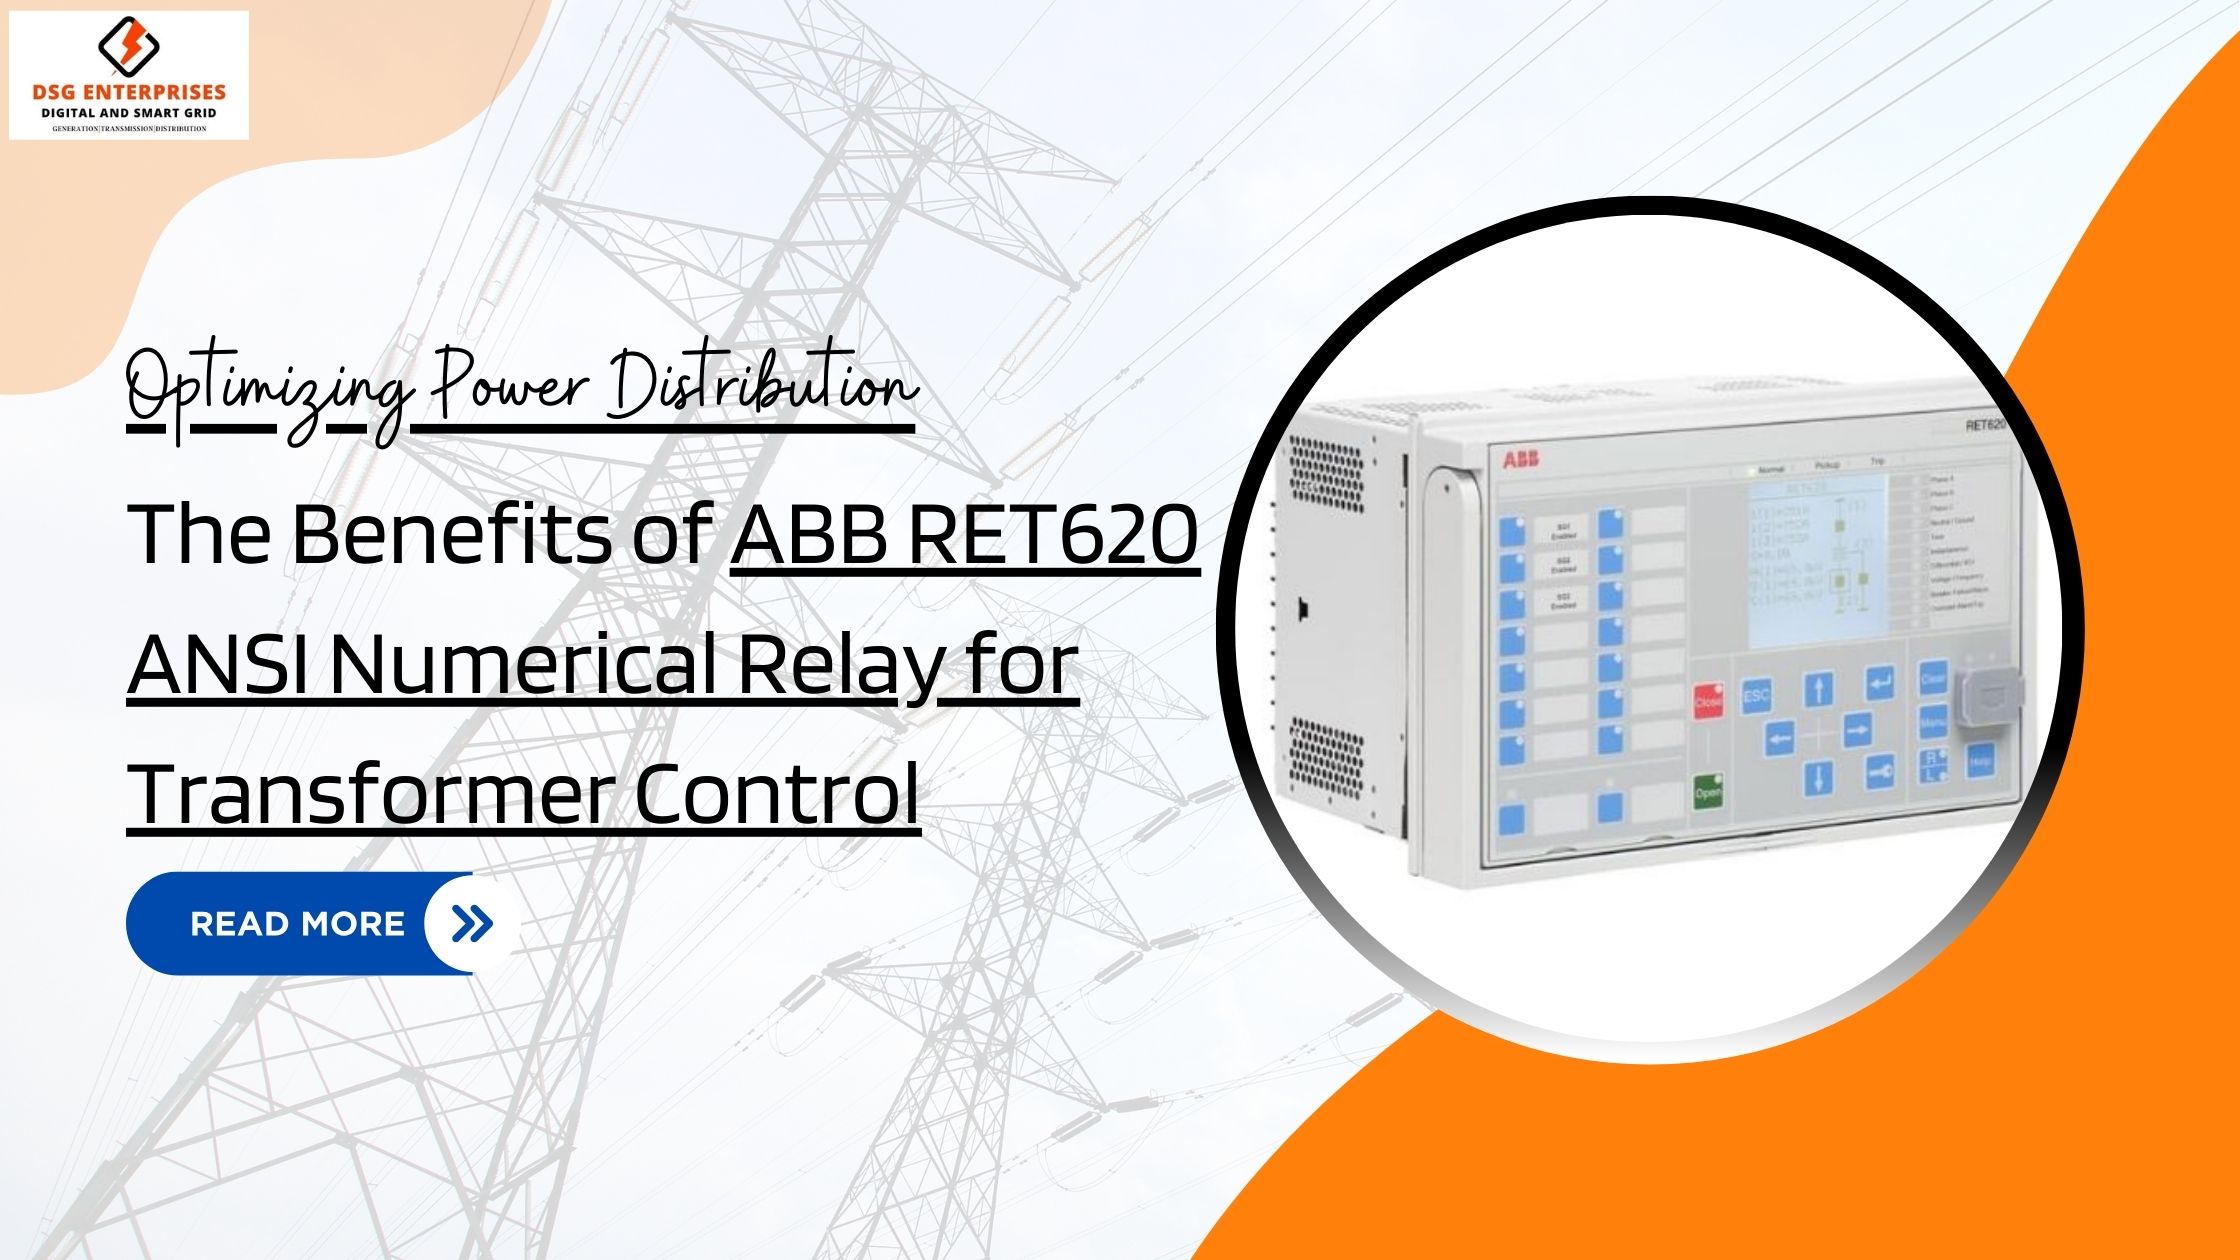 You are currently viewing Optimizing Power Distribution: The Benefits of ABB RET620 ANSI Numerical Relay for Transformer Control